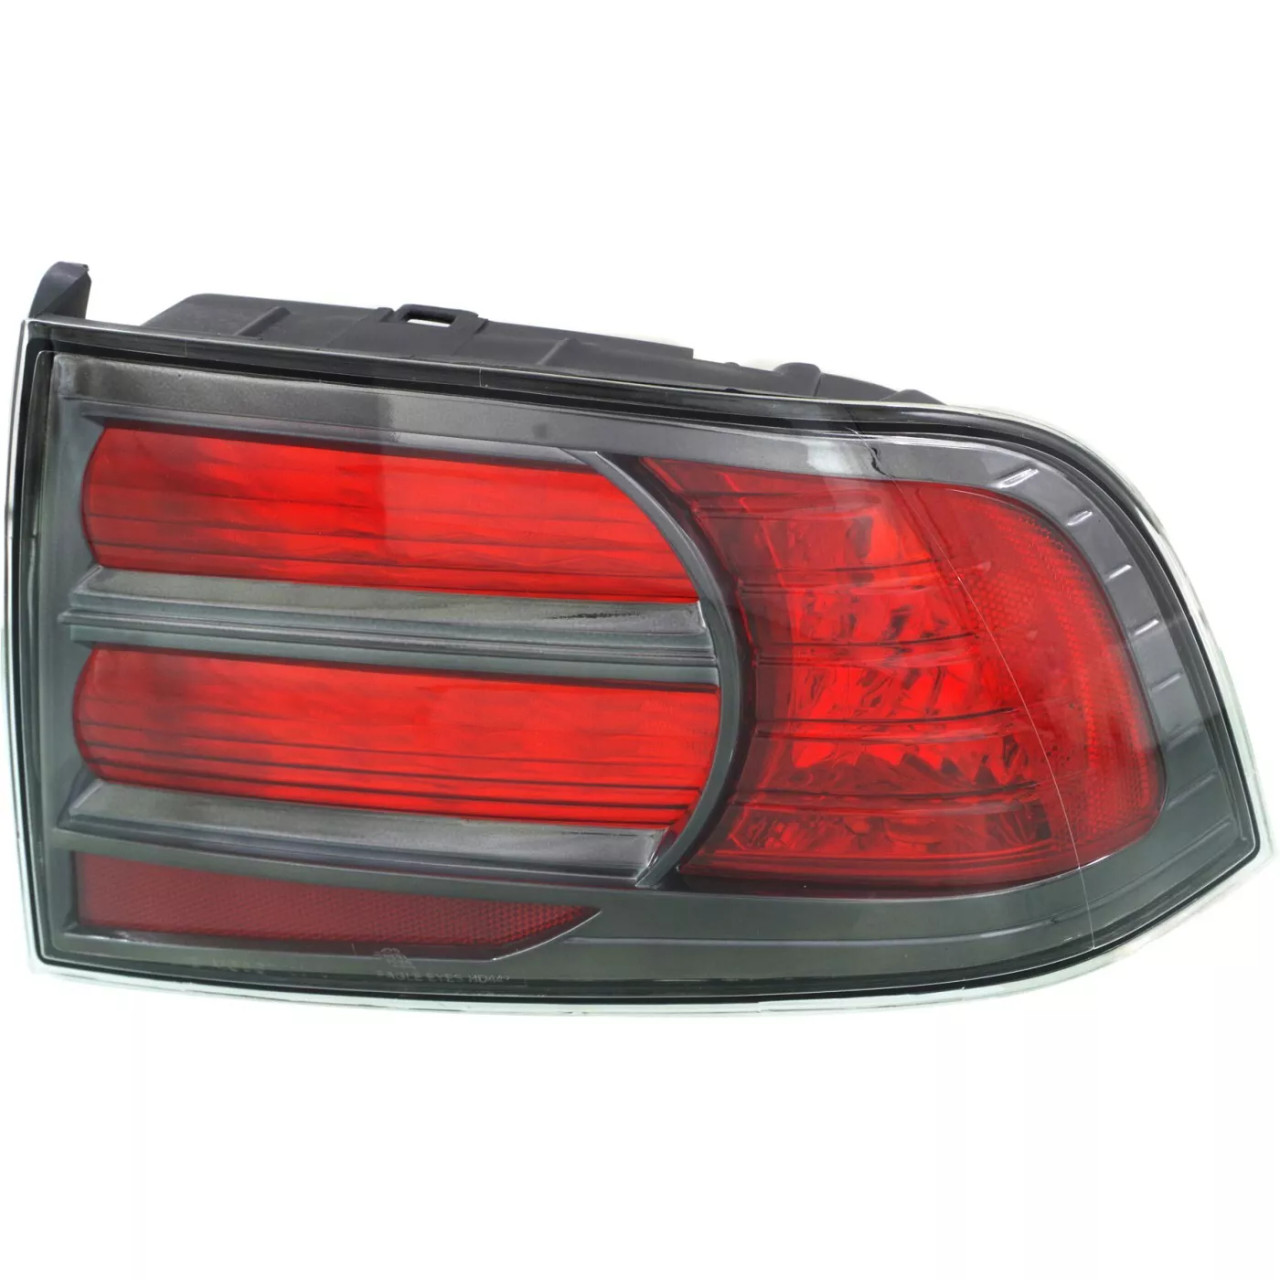 2004-2008 Acura TL Type-S Style Tail Lights Lamps Replacement Left+Right 04-08